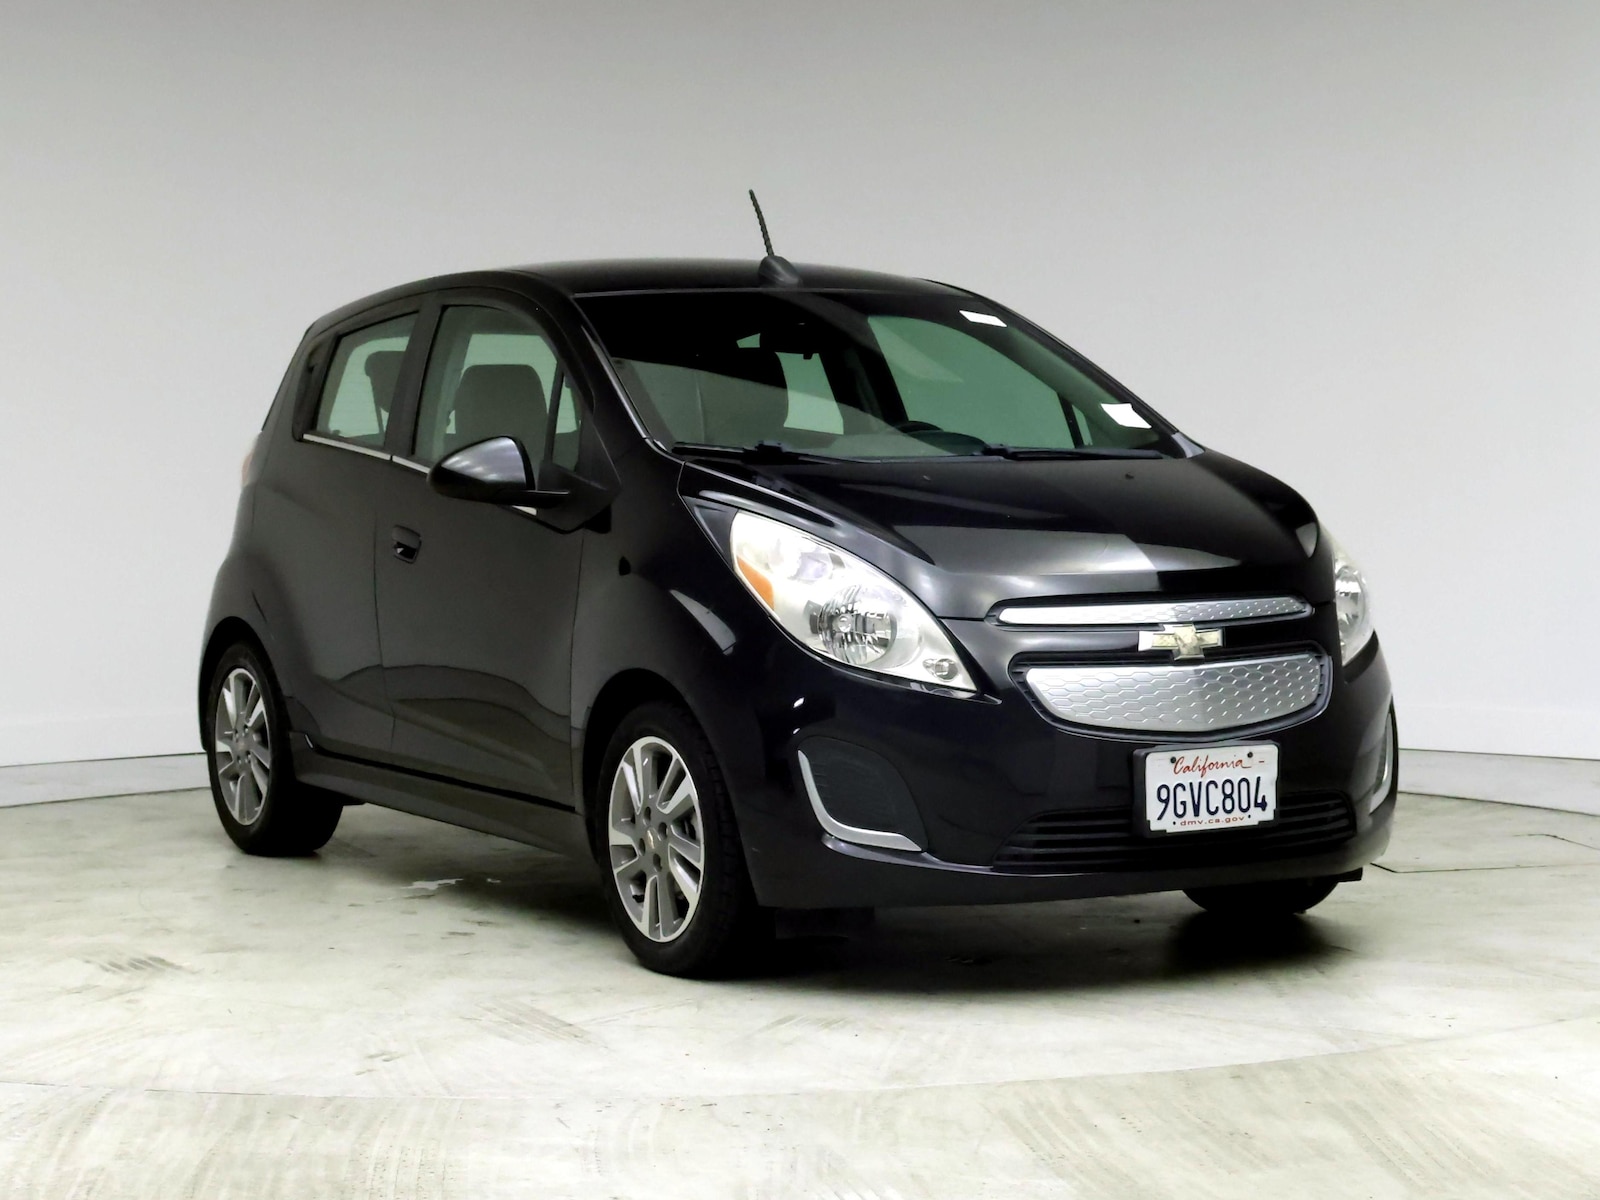 Used 2015 Chevrolet Spark 1LT with VIN KL8CK6S0XFC721305 for sale in Kenosha, WI